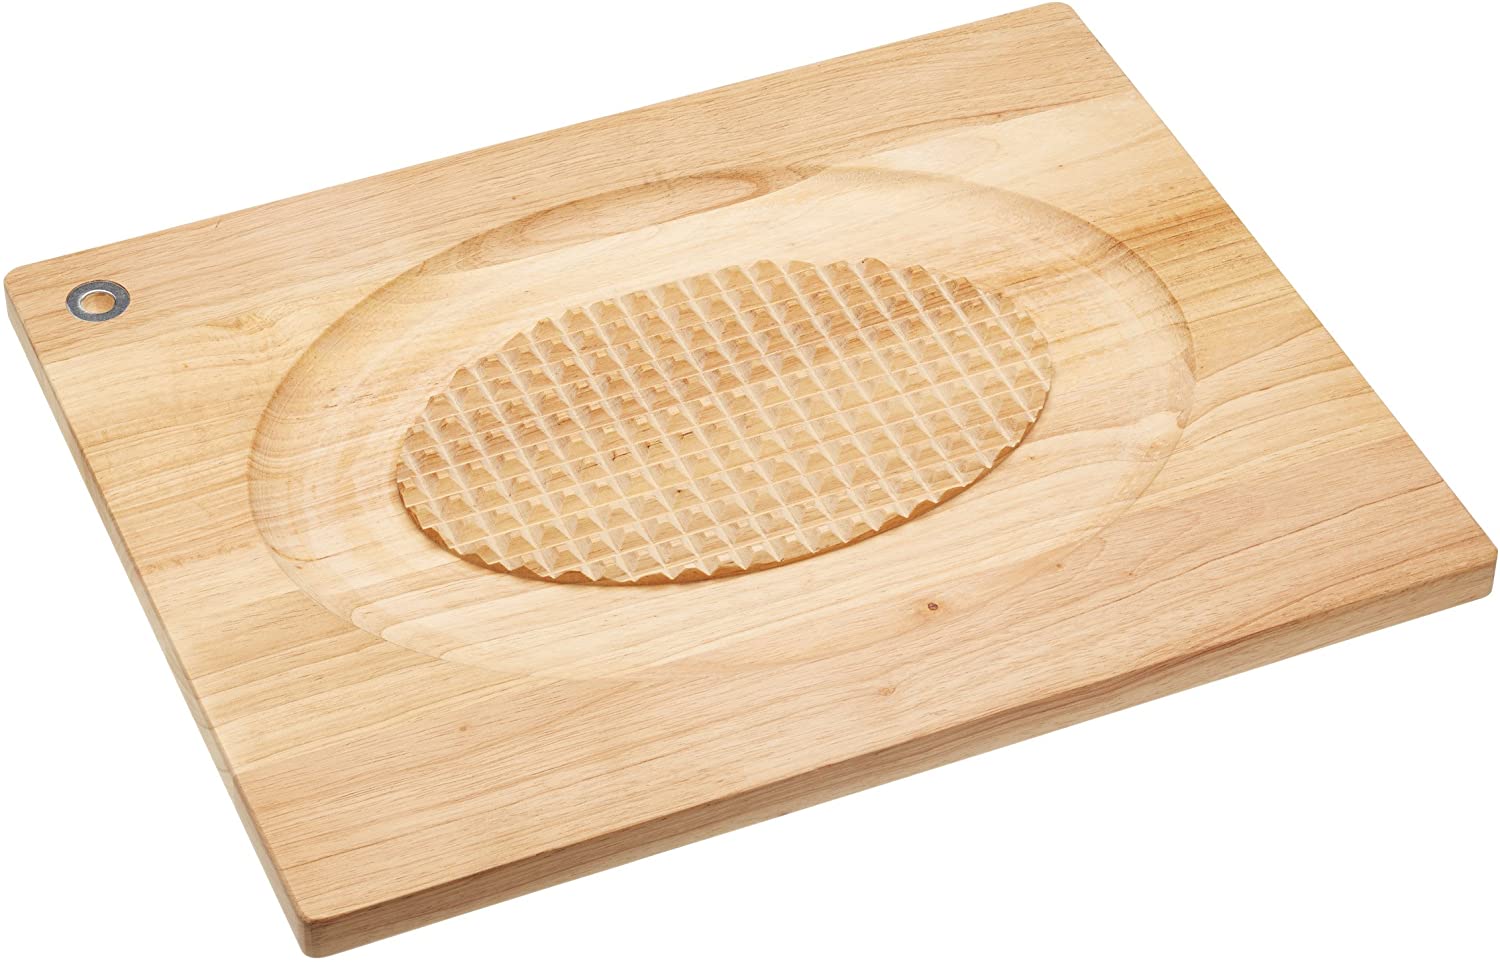 KitchenCraft masterclass Master Class Carving Board 46 x 36 x 2 cm Made of Rubber Tree Wood in Brown, Wood, 12 x 17 x 22 cm